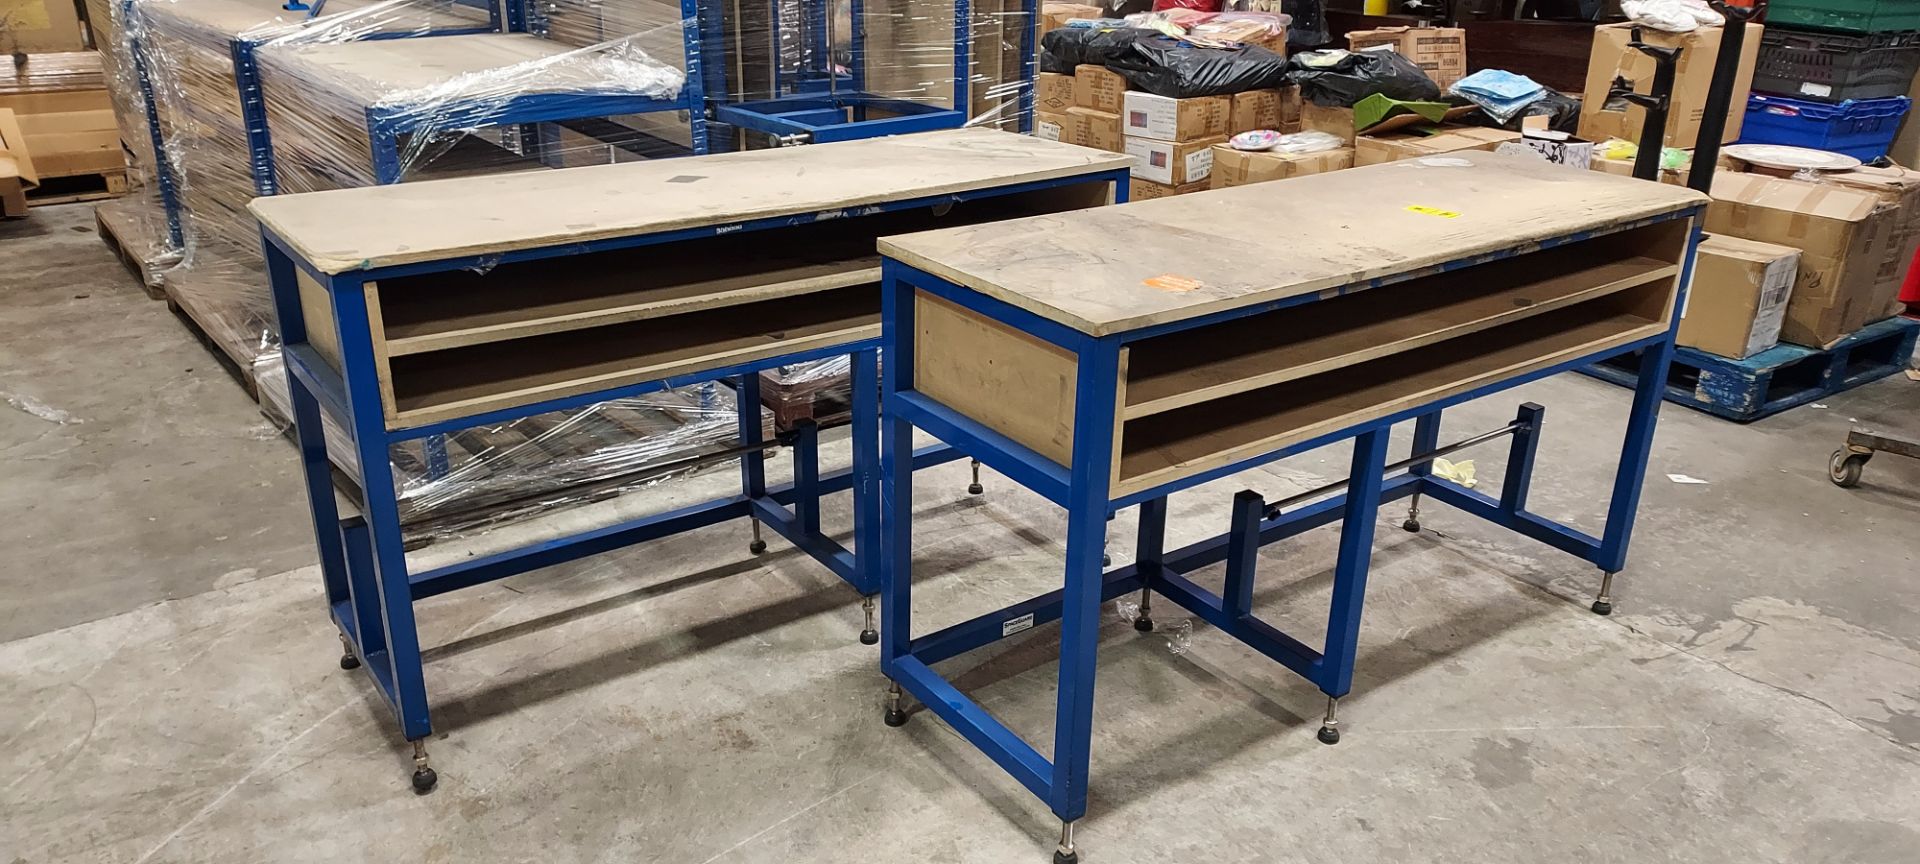 2 X HEAVY DUTY WORK BENCH WITH UNDER SHELVING -( ADJUSTABLE HEIGHTS ON LEGS ) - 55 CM WIDTH - 160 CM